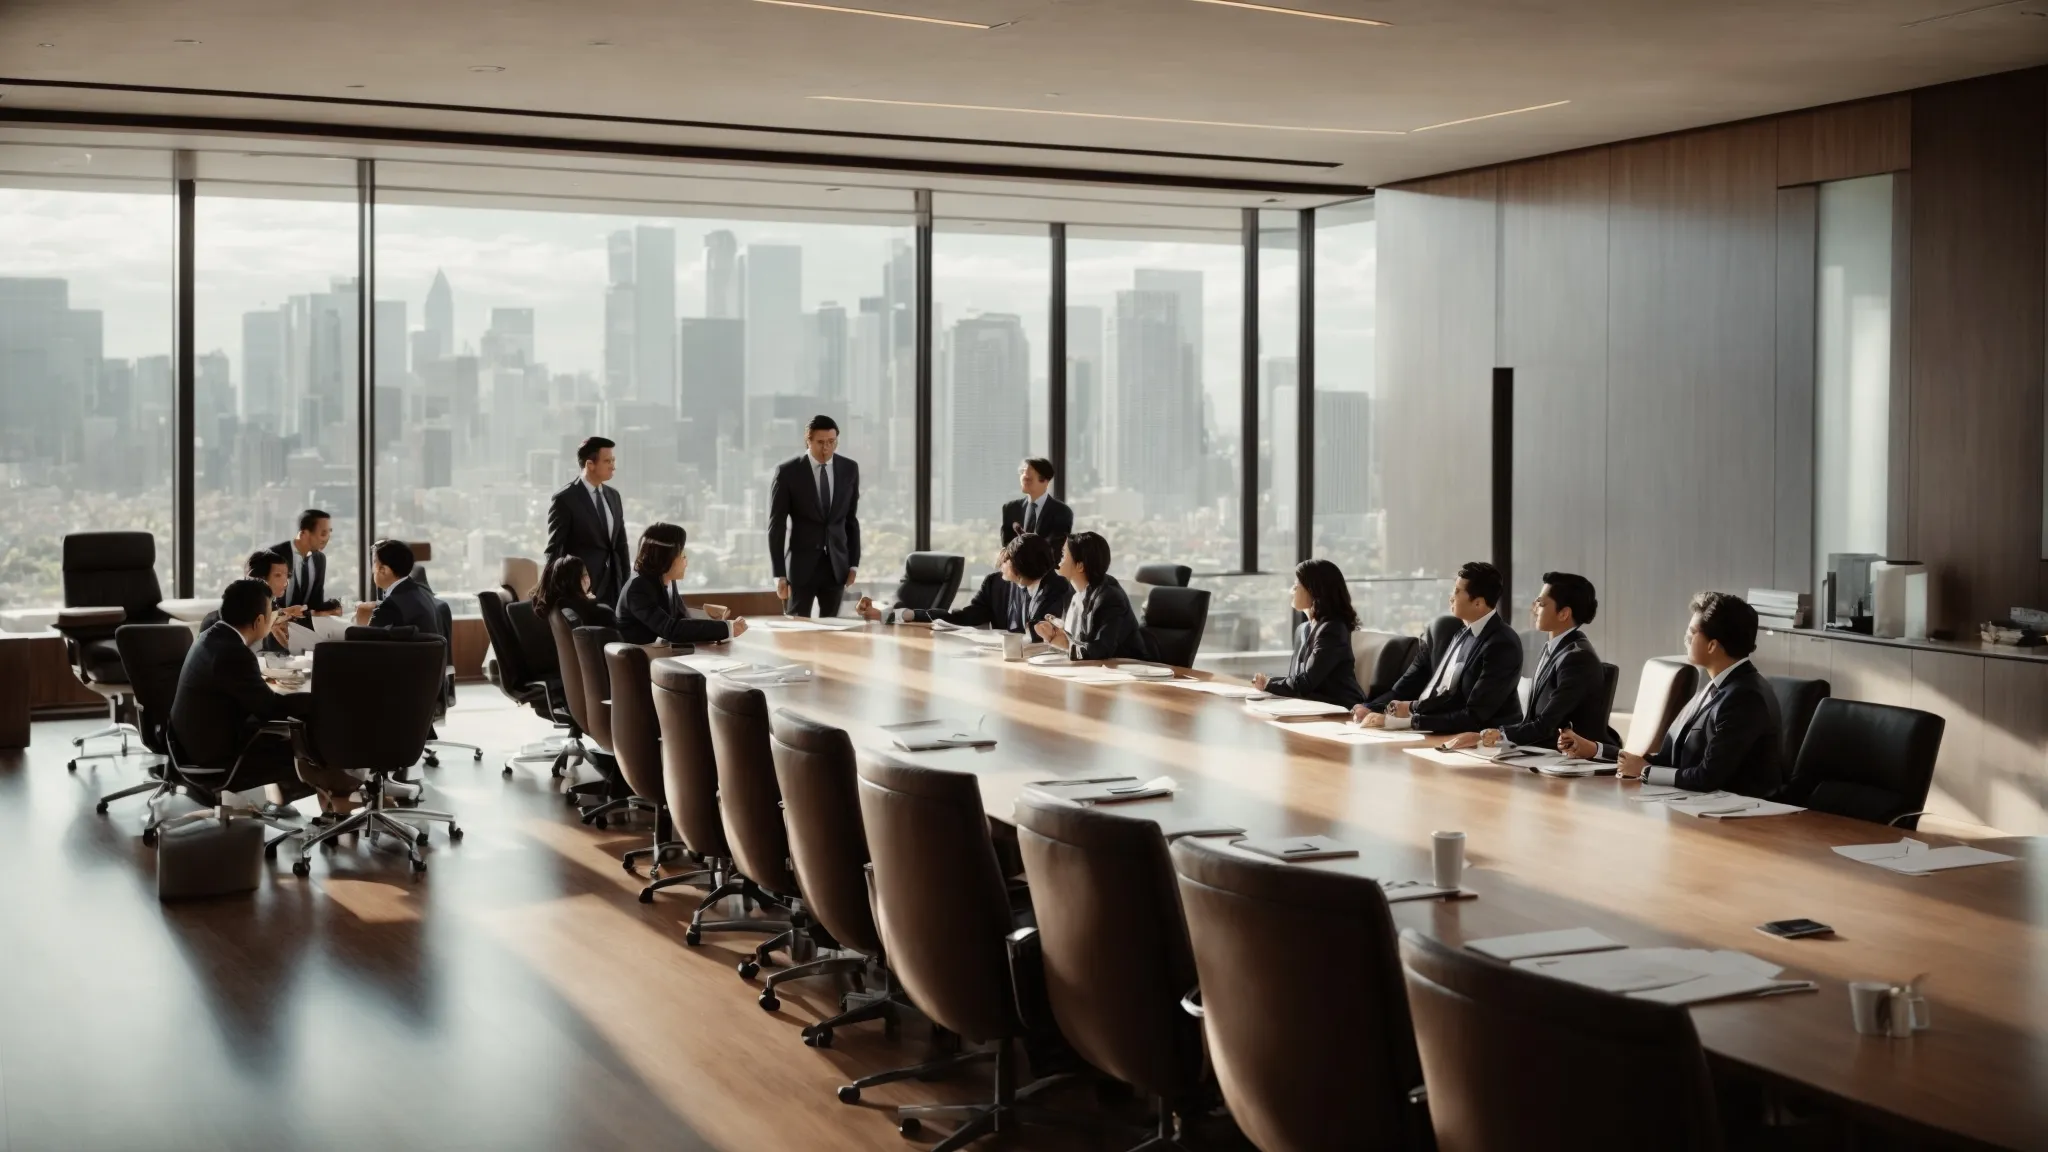 a high-level business meeting with executives discussing over documents on a large conference table.